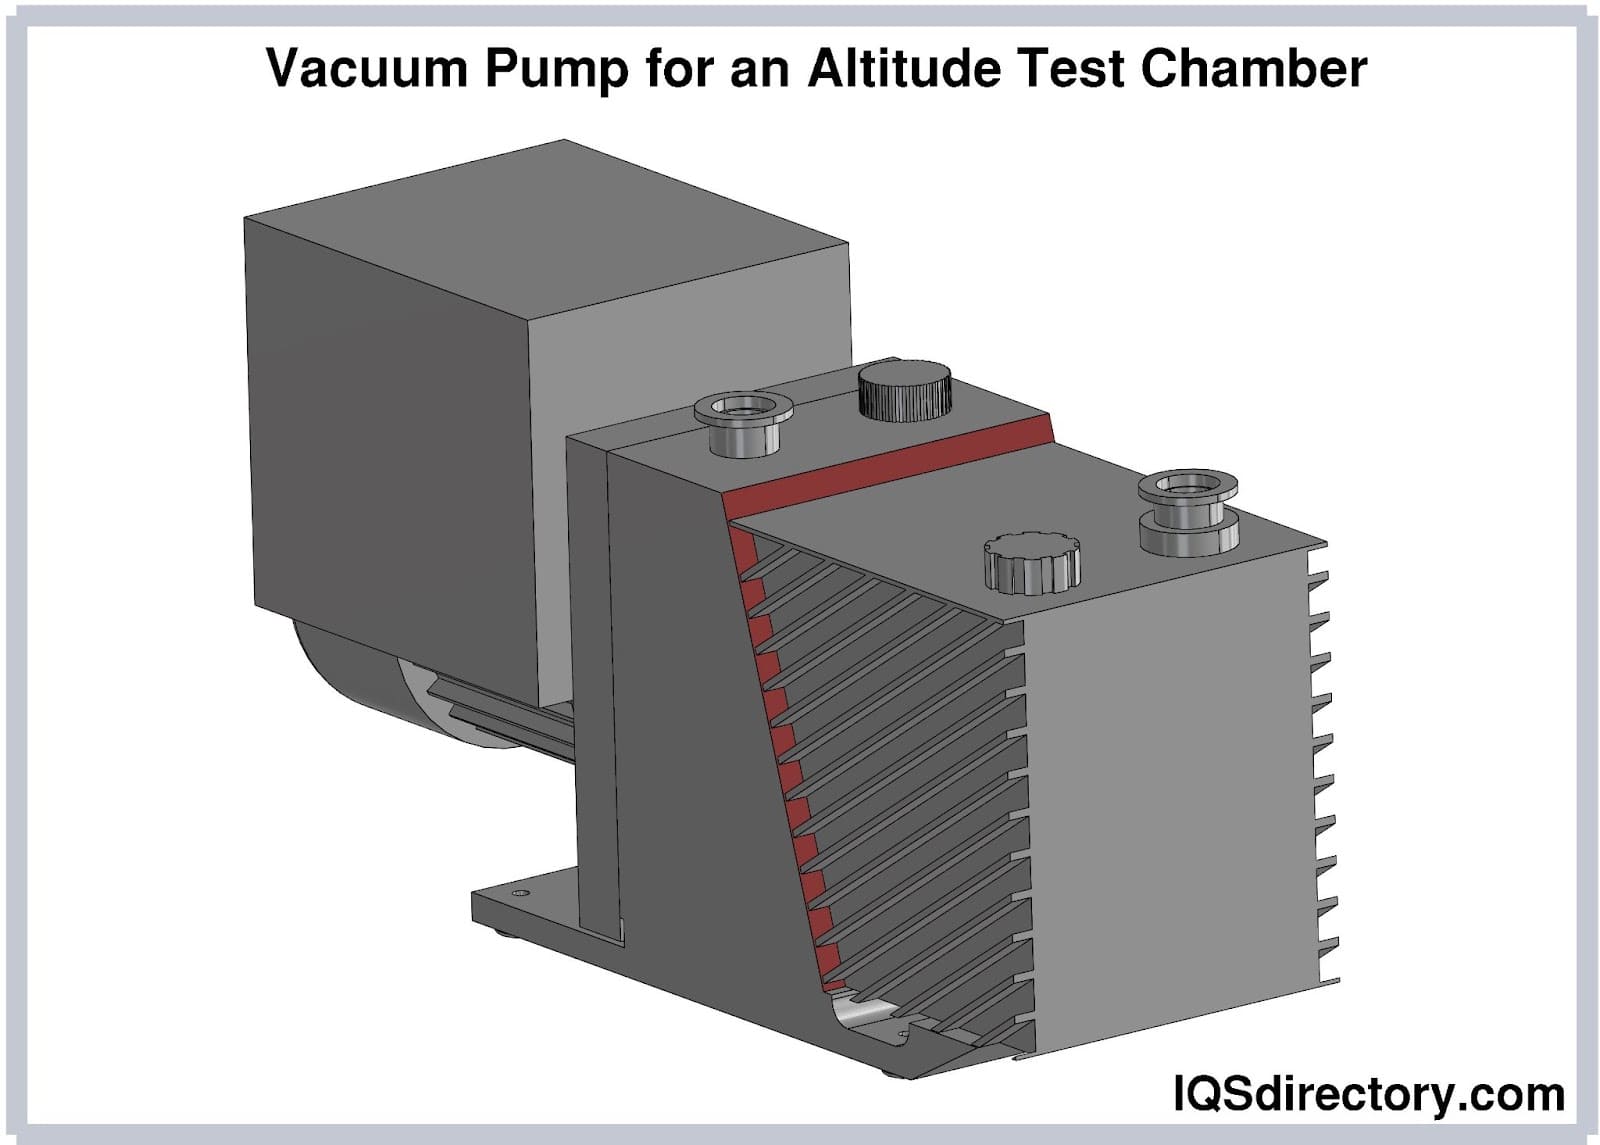 Vacuum Pump for an Altitude Test Chamber